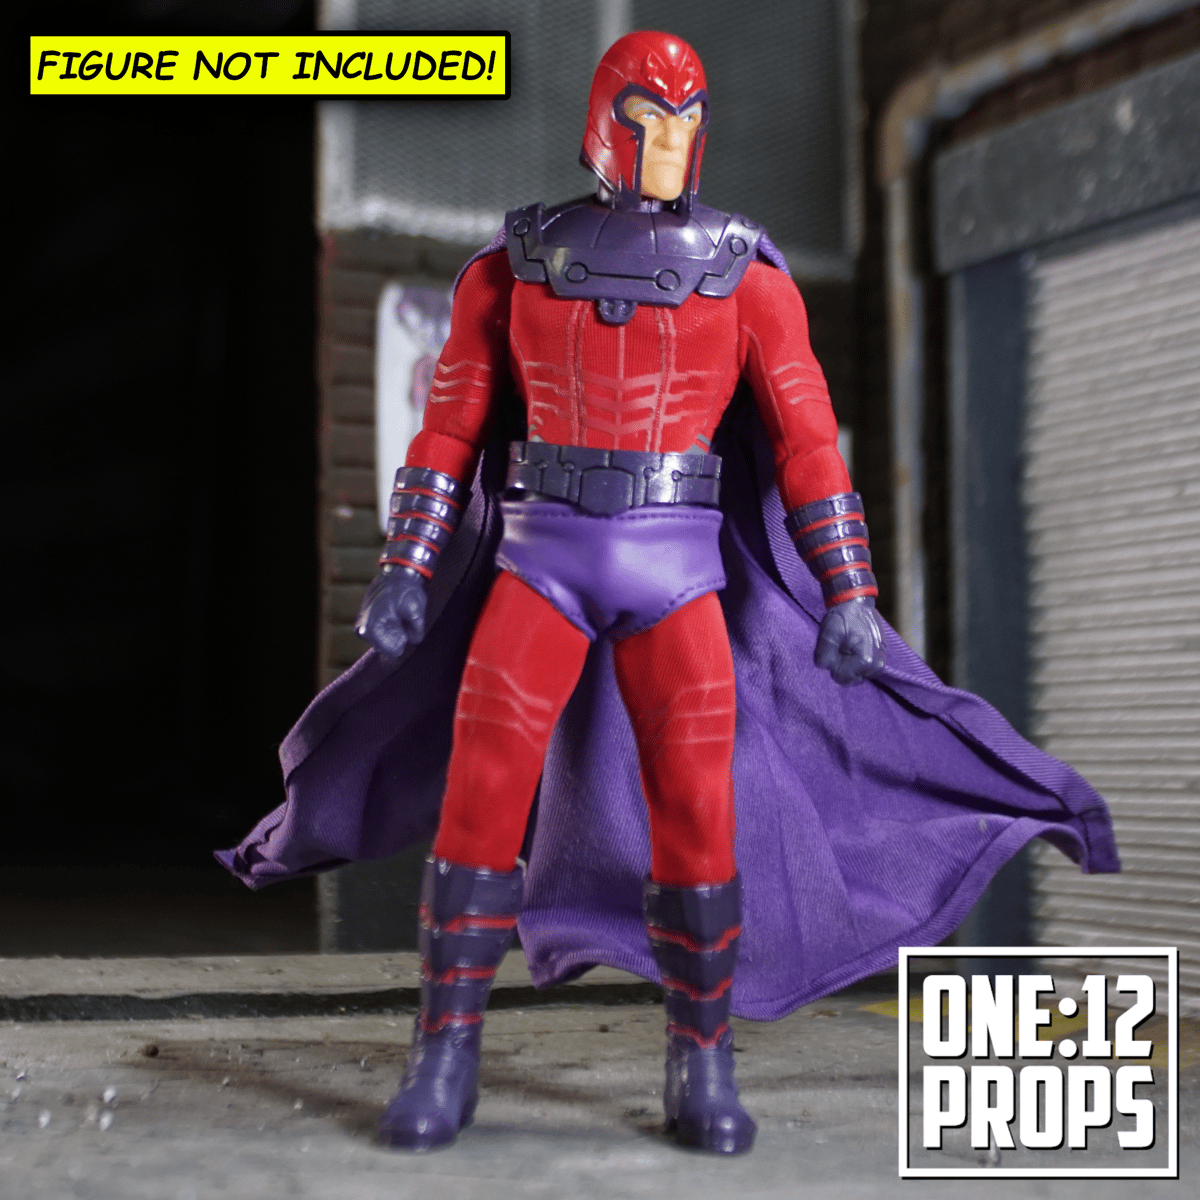 ONE12 PROPS | Custom accessories for your action figure